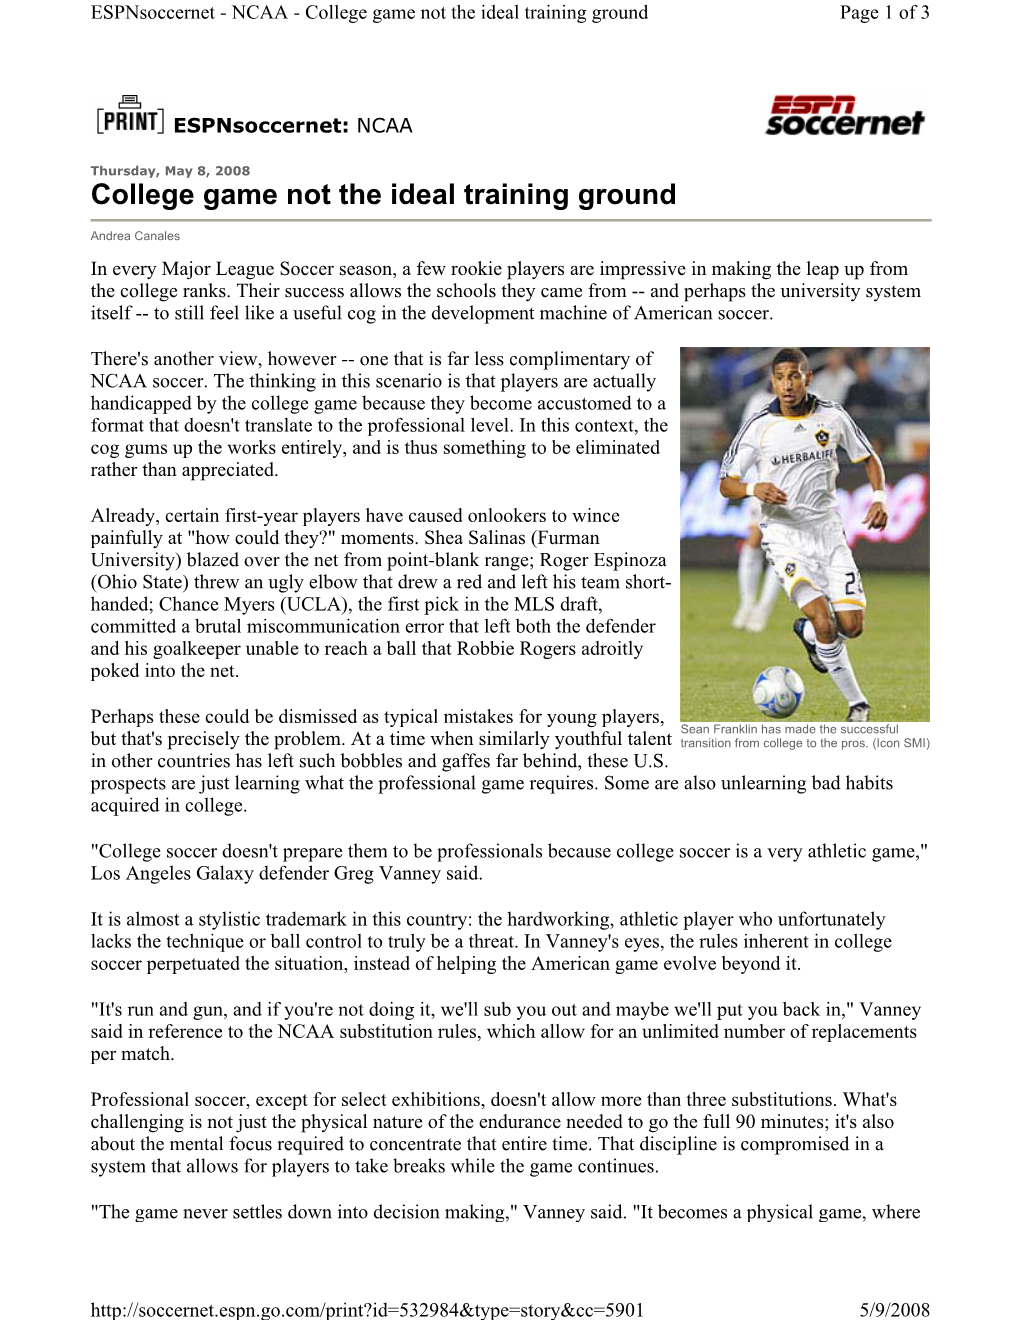 College Game Not the Ideal Training Ground Page 1 of 3